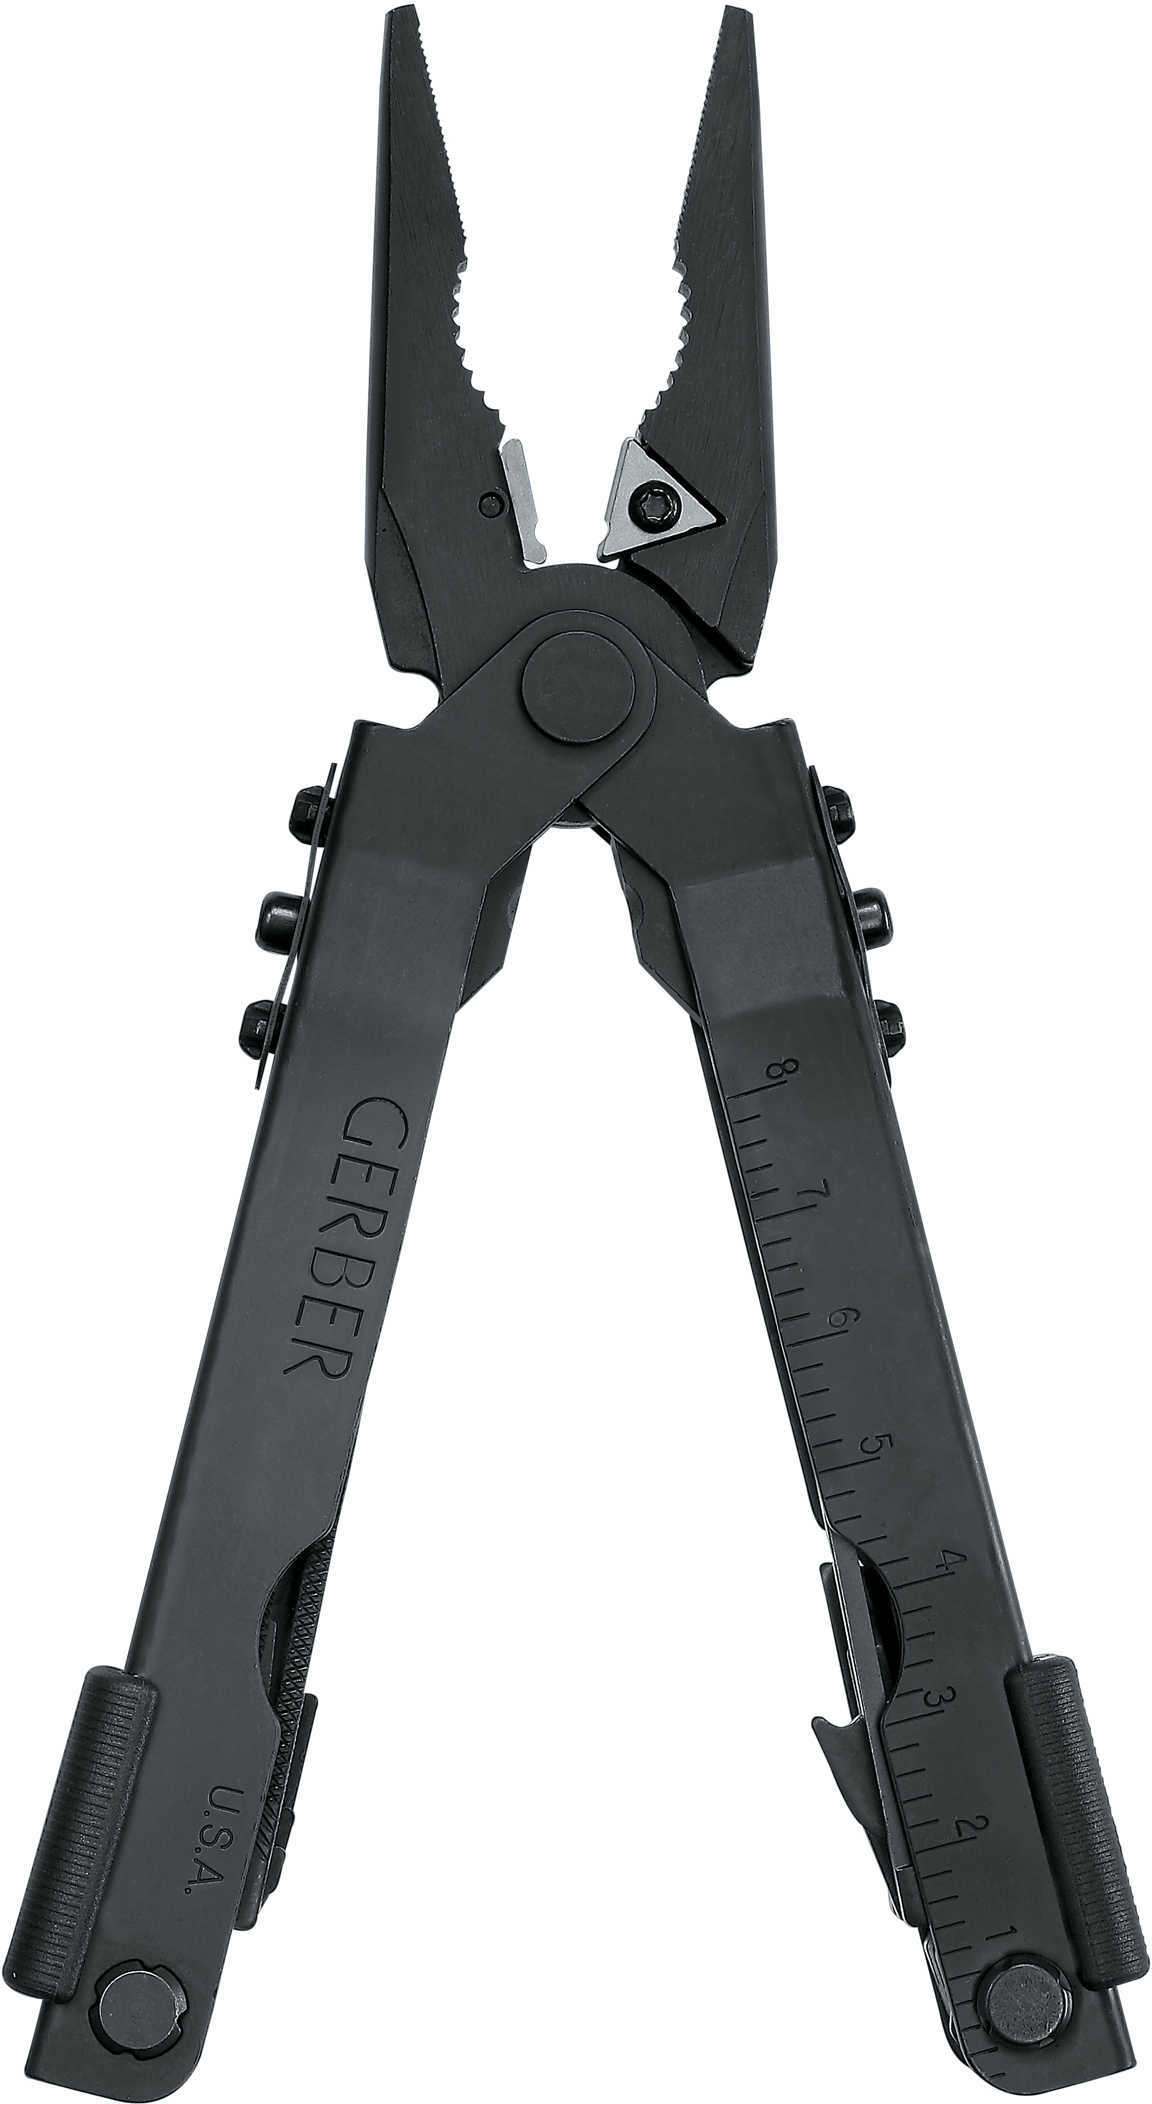 Gerber Blades Needle Nose Multi-Plier With Black Stainless Steel Handle & Sheath Md: 07550